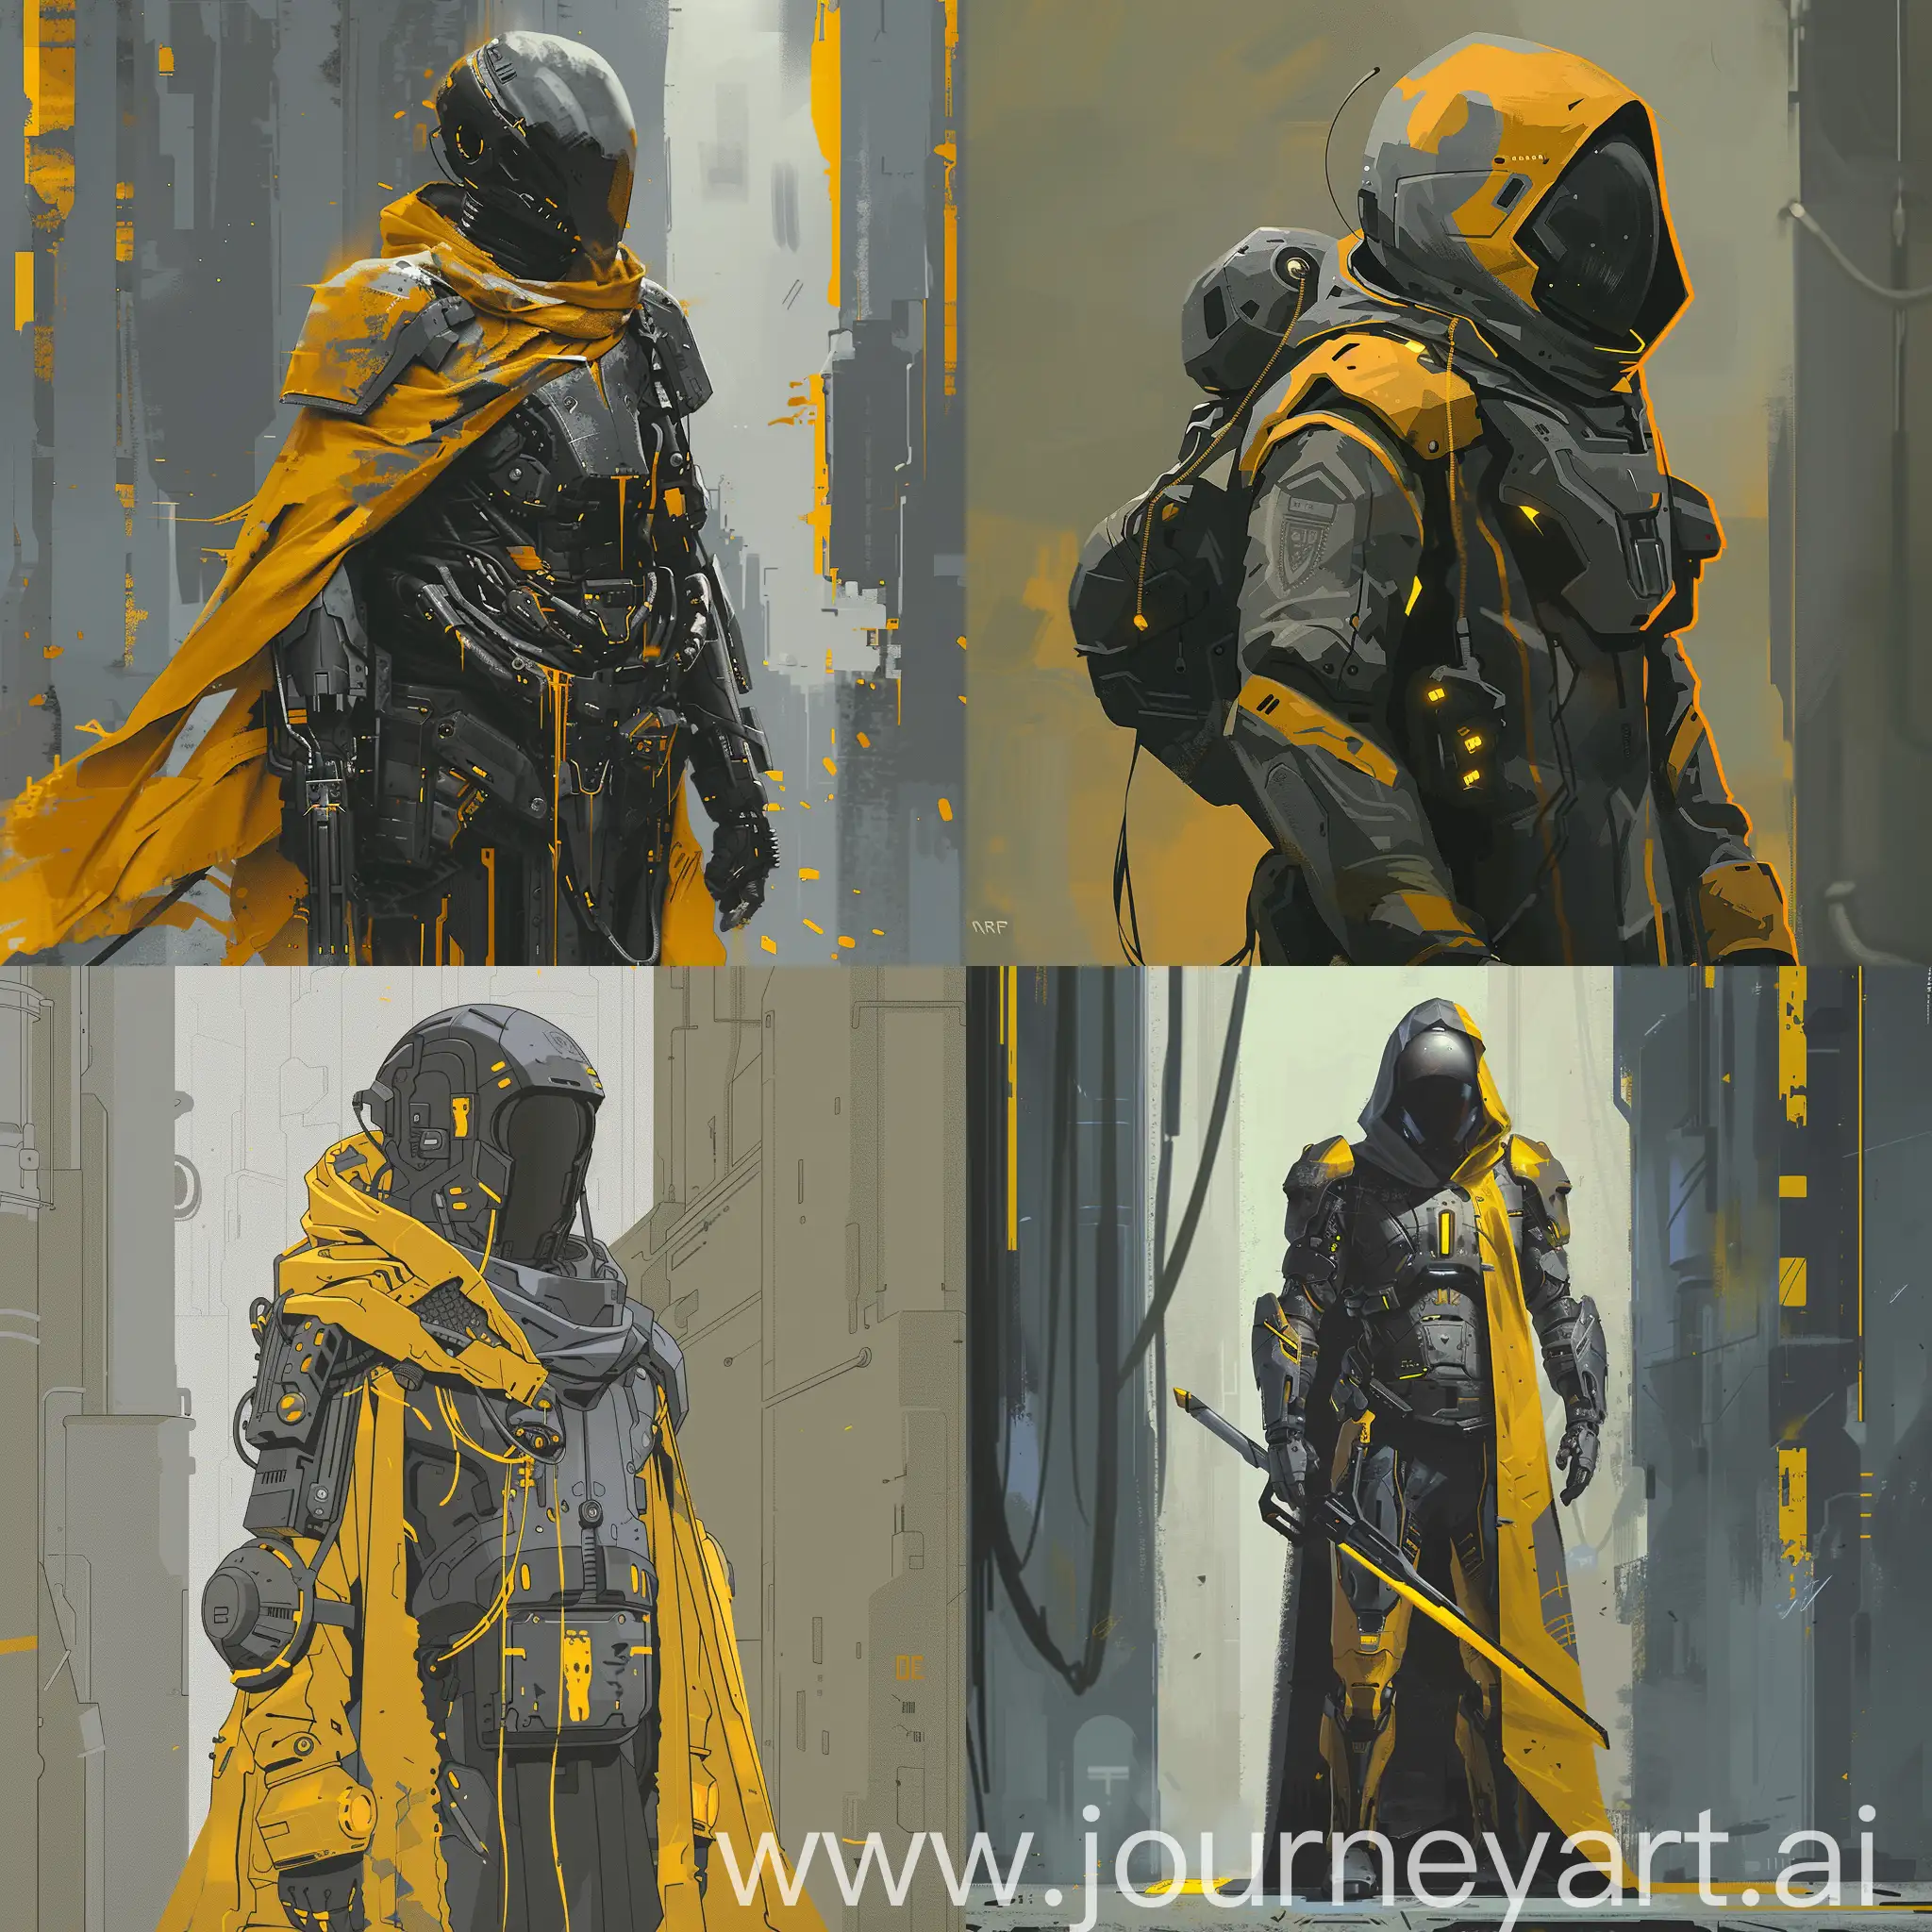 Create sci-fi character illustrations in a sleek futuristic aesthetic inspired by high-resolution 32k UHD quality. Incorporate the artistic styles of Atey Ghailan and Geoff Johns, utilizing a color palette dominated by dark yellow and gray tones. Employ the Panasonic Lumix S Pro 50mm f/1.4 lens to capture intricate details. Fuse techpunk and knightcore elements seamlessly, while maintaining the specified AR (aspect ratio) of 72:119, resolution of 750 pixels, and a visual style of 5.2.